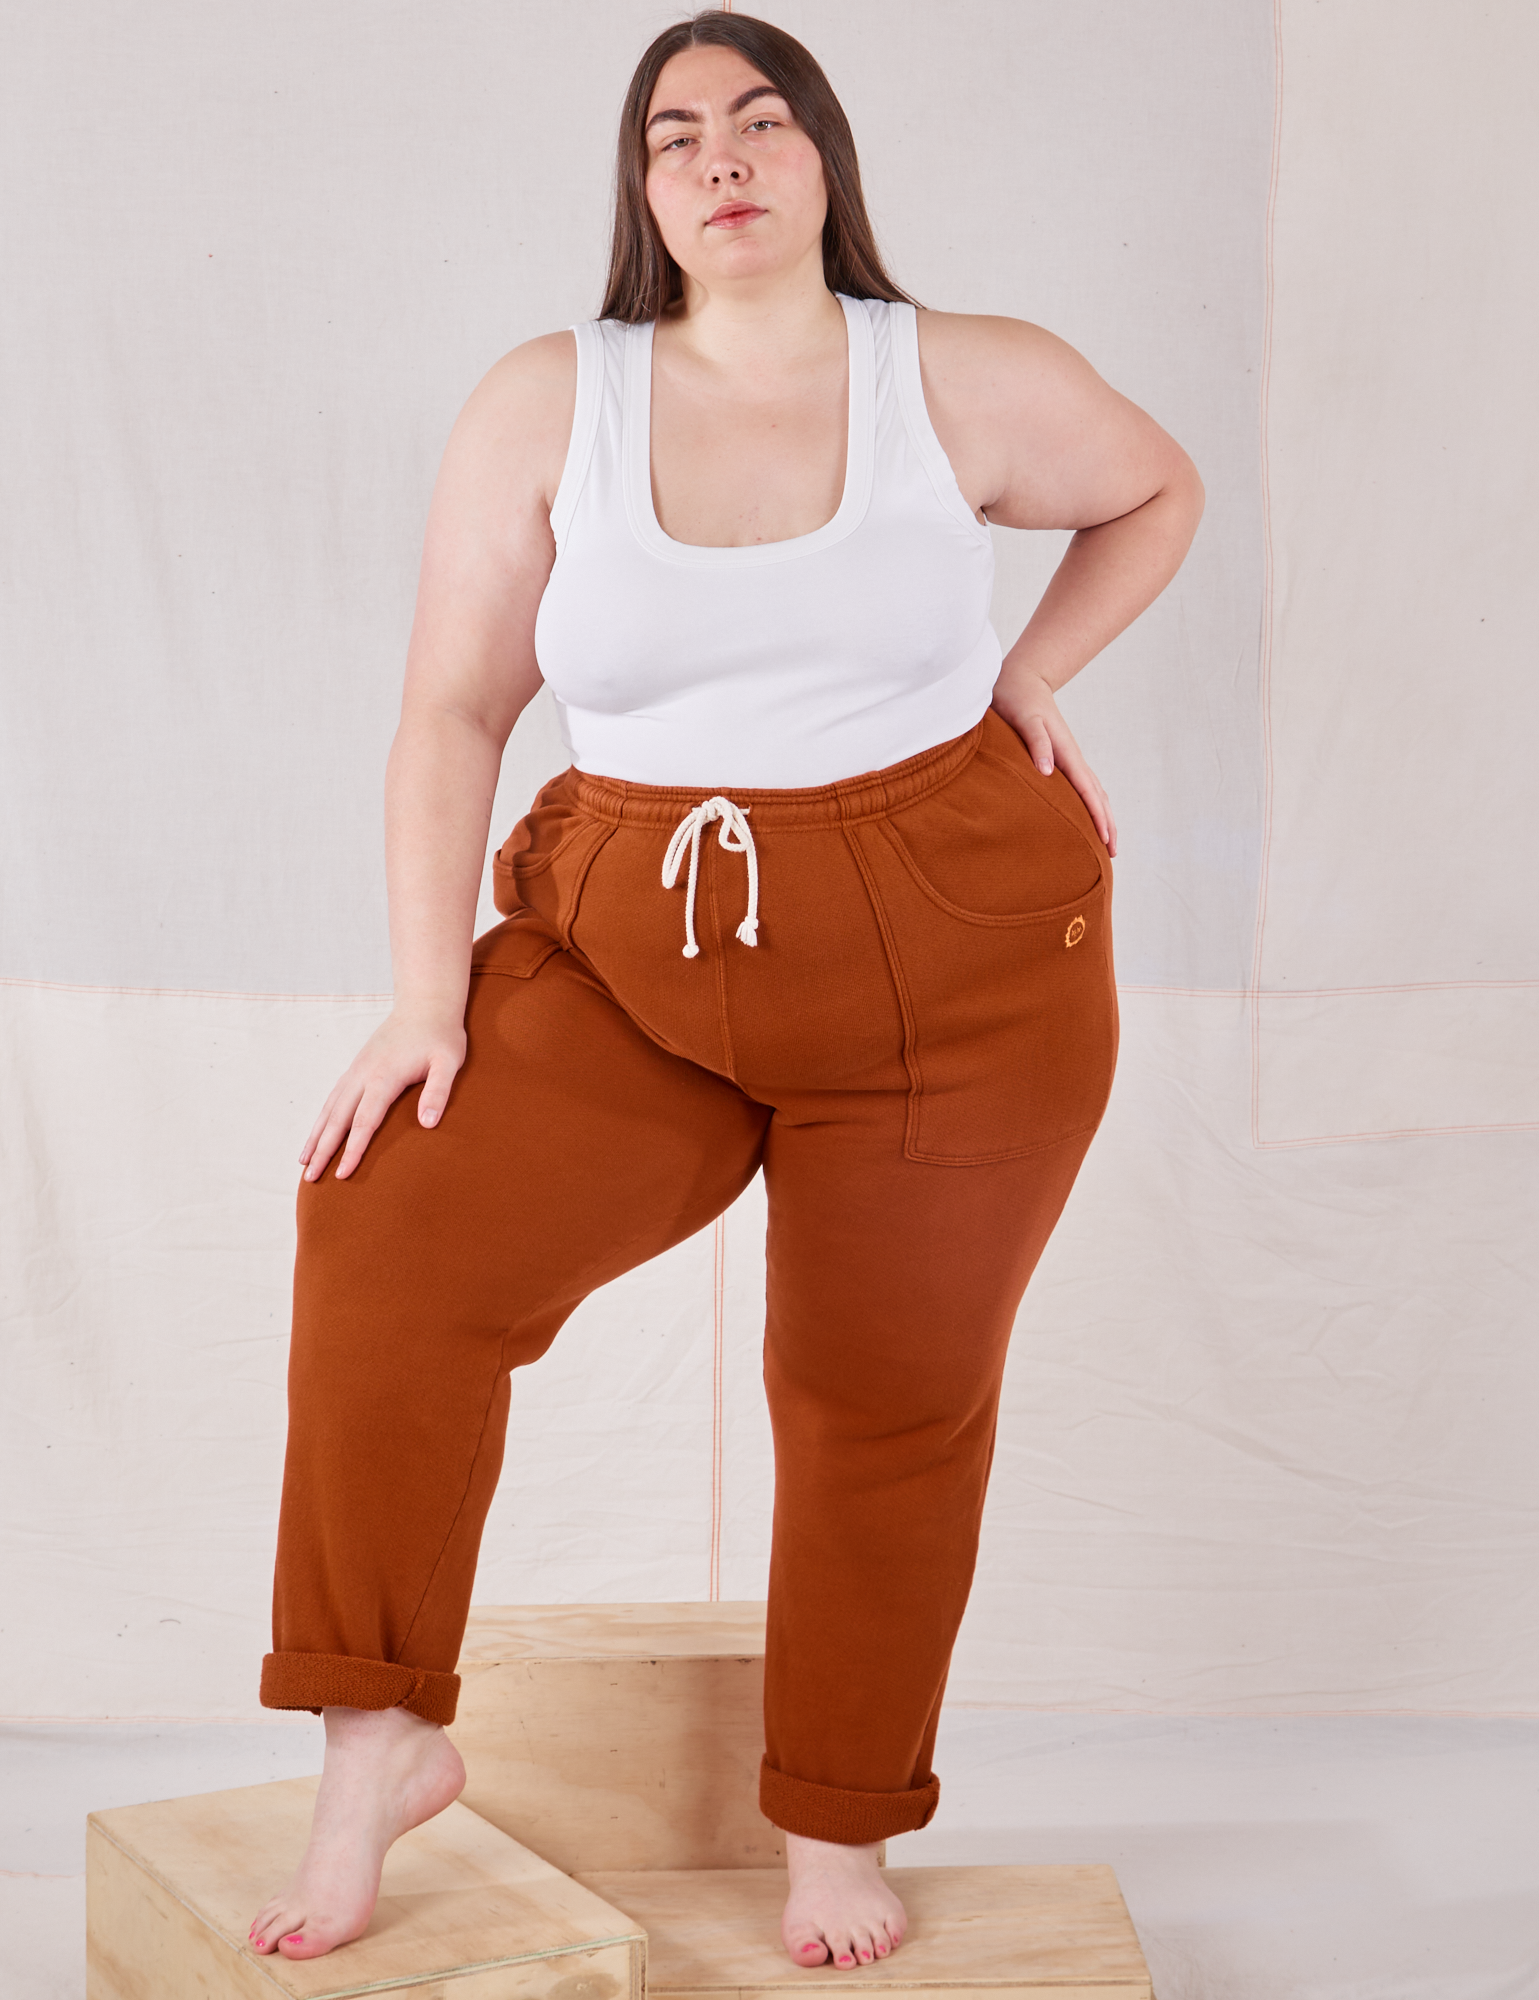 Marielena is 5&#39;8&quot; and wearing 1XL Rolled Cuff Sweat Pants in Burnt Terracotta paired with vintage off-white Cropped Tank